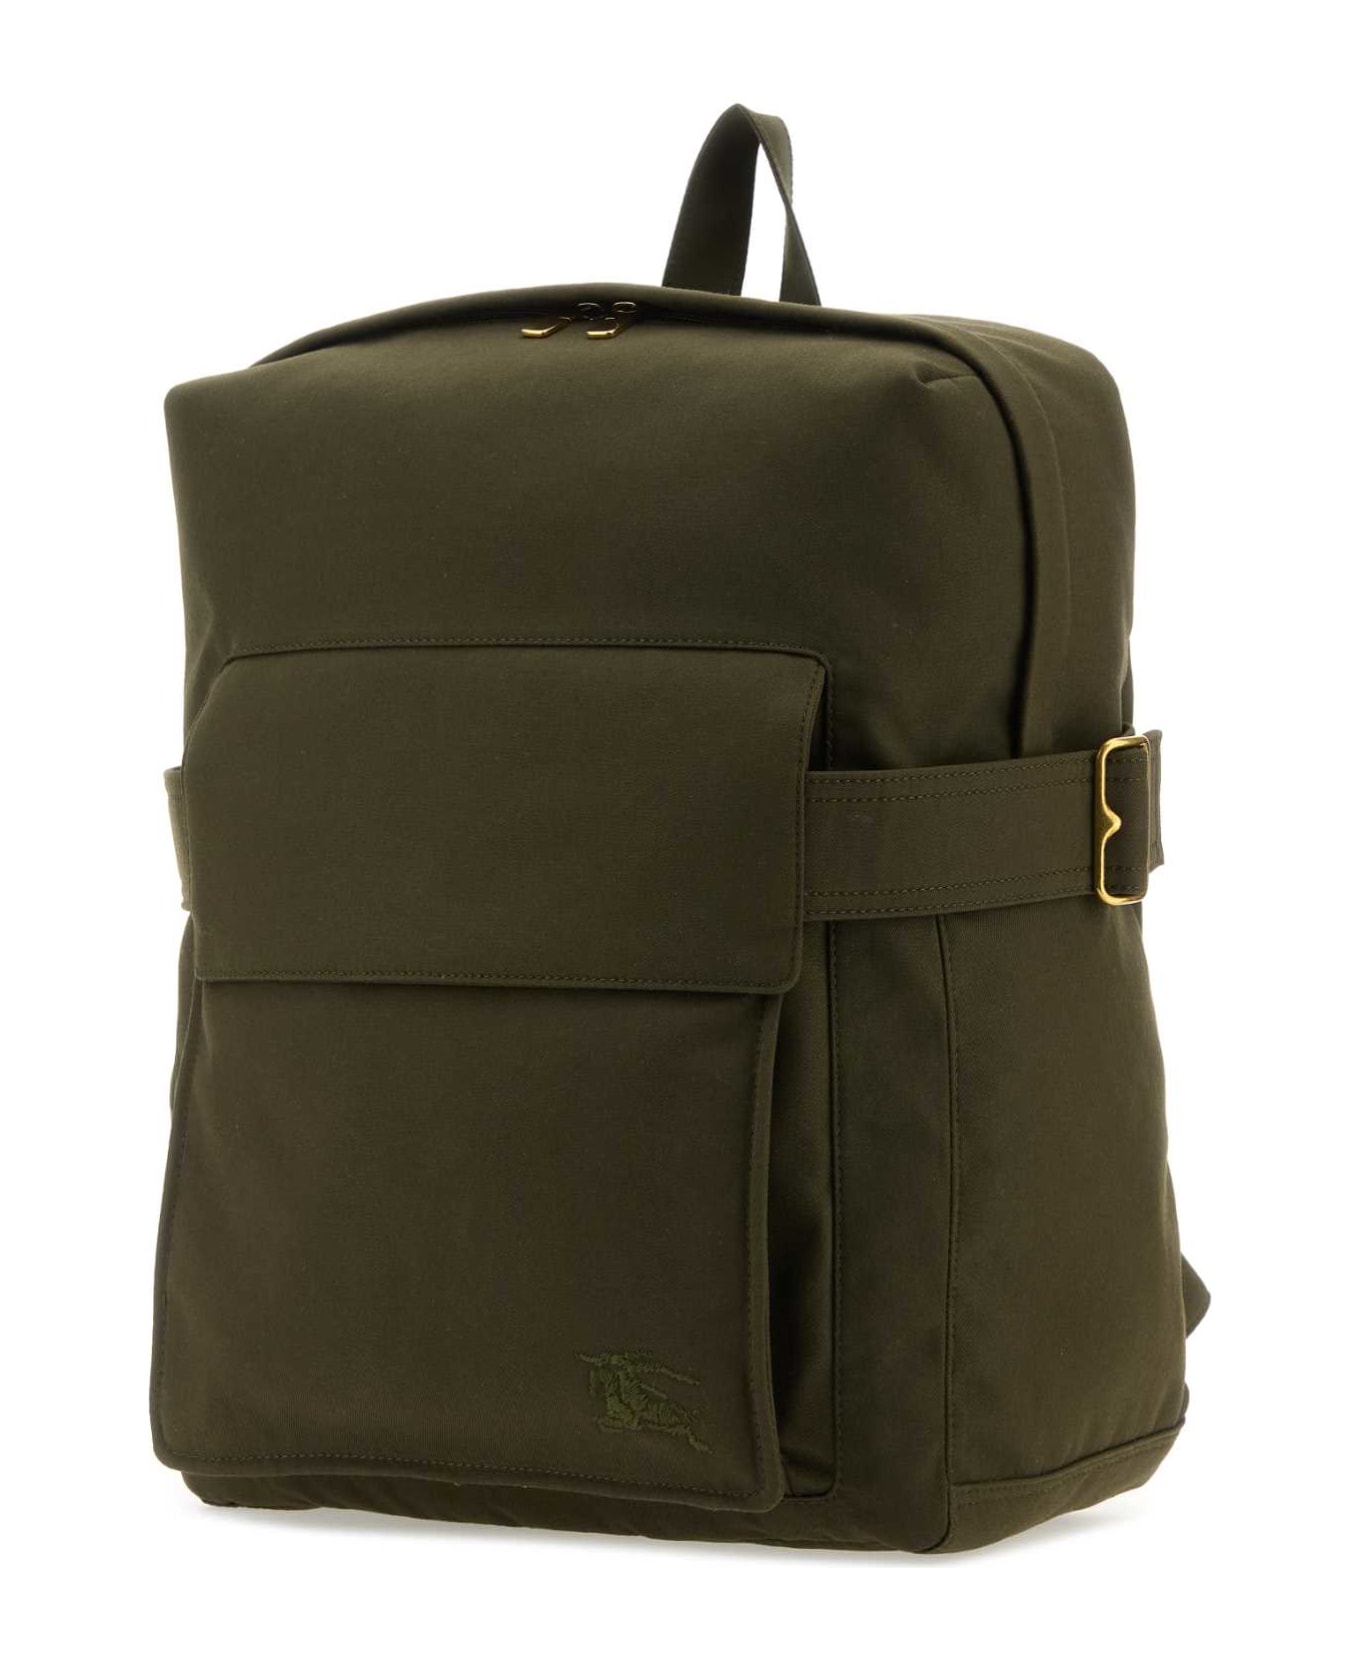 Burberry Army Green Polyester Blend Trench Backpack - MILITARY バックパック